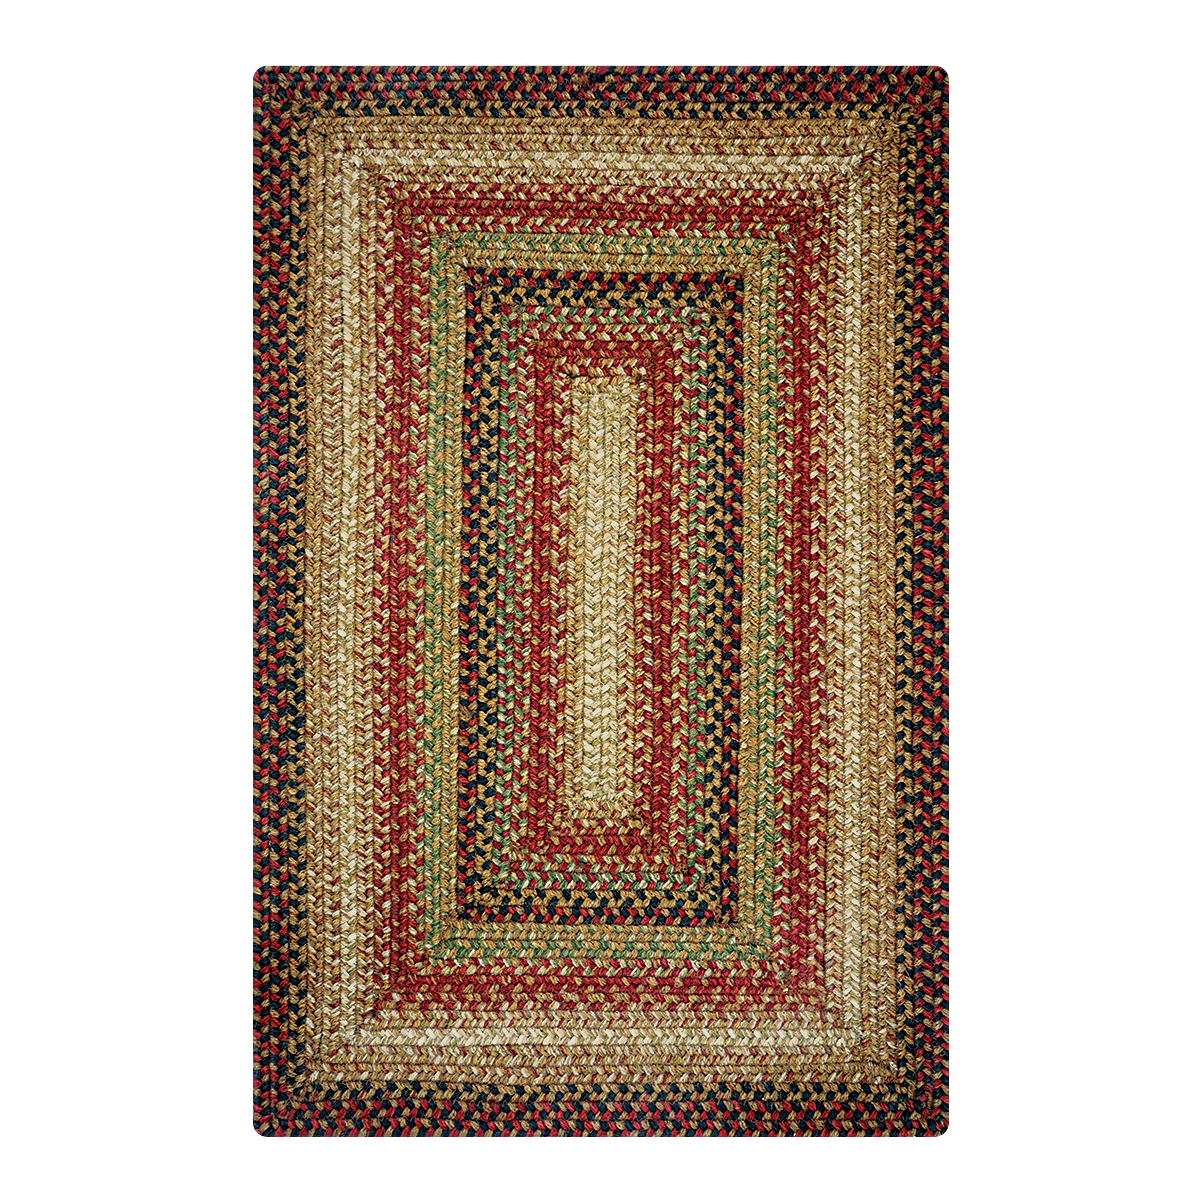 Picture of Homespice Decor 572806 11 x 36 in. Gingerbread Rectangular Table Runner - Brown, Deep Red